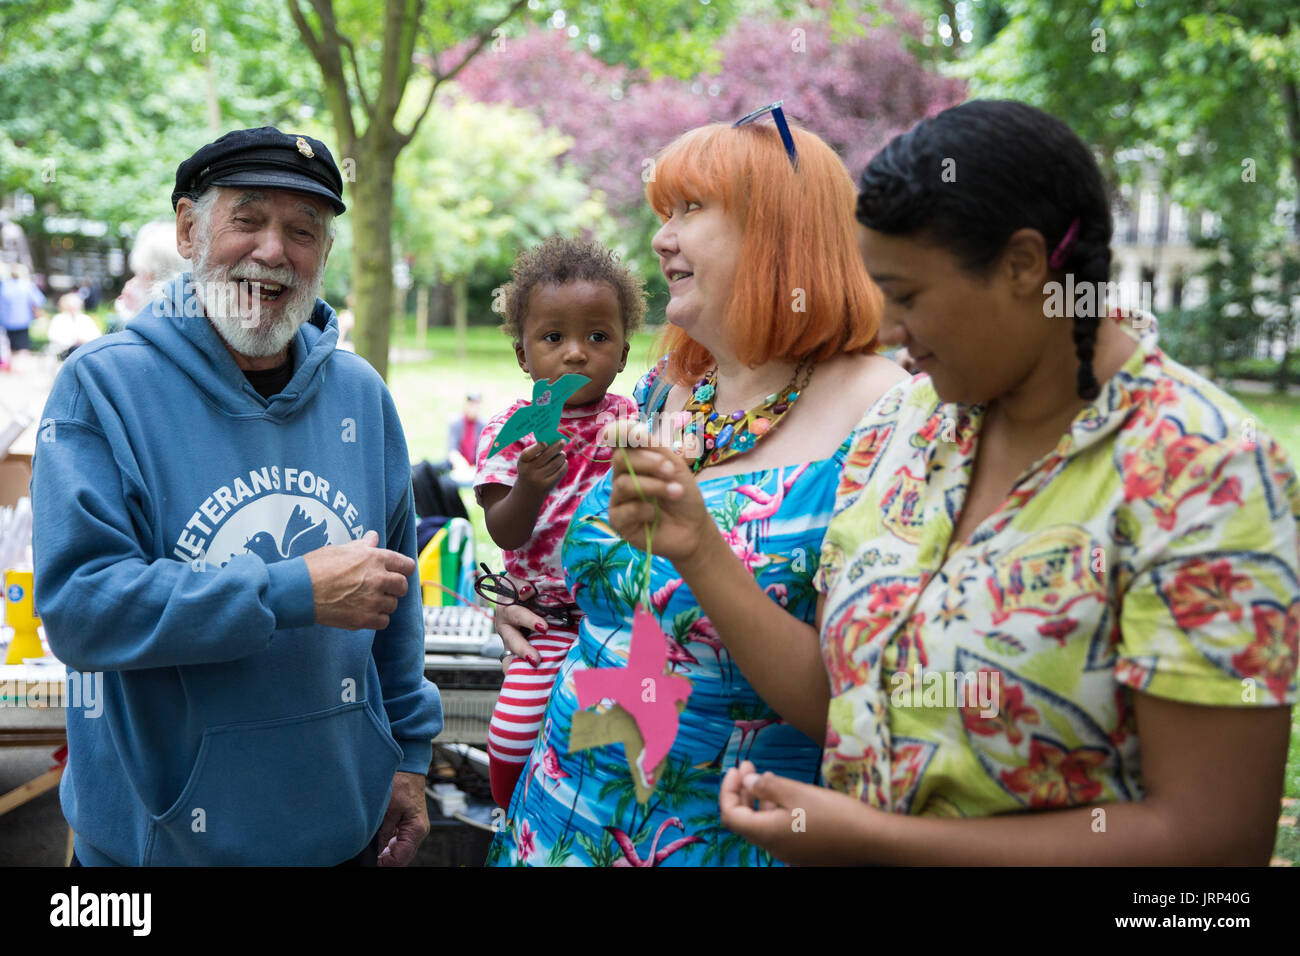 London, UK. 6th August, 2017. Jim Radford, D-Day veteran, folk singer and peace campaigner with Veterans for Peace, shares a joke with peace campaigners posting messages to Prime Minister Theresa May on the commemorative Hiroshima cherry tree during the annual Hiroshima Day anniversary event in Tavistock Square. Credit: Mark Kerrison/Alamy Live News Stock Photo